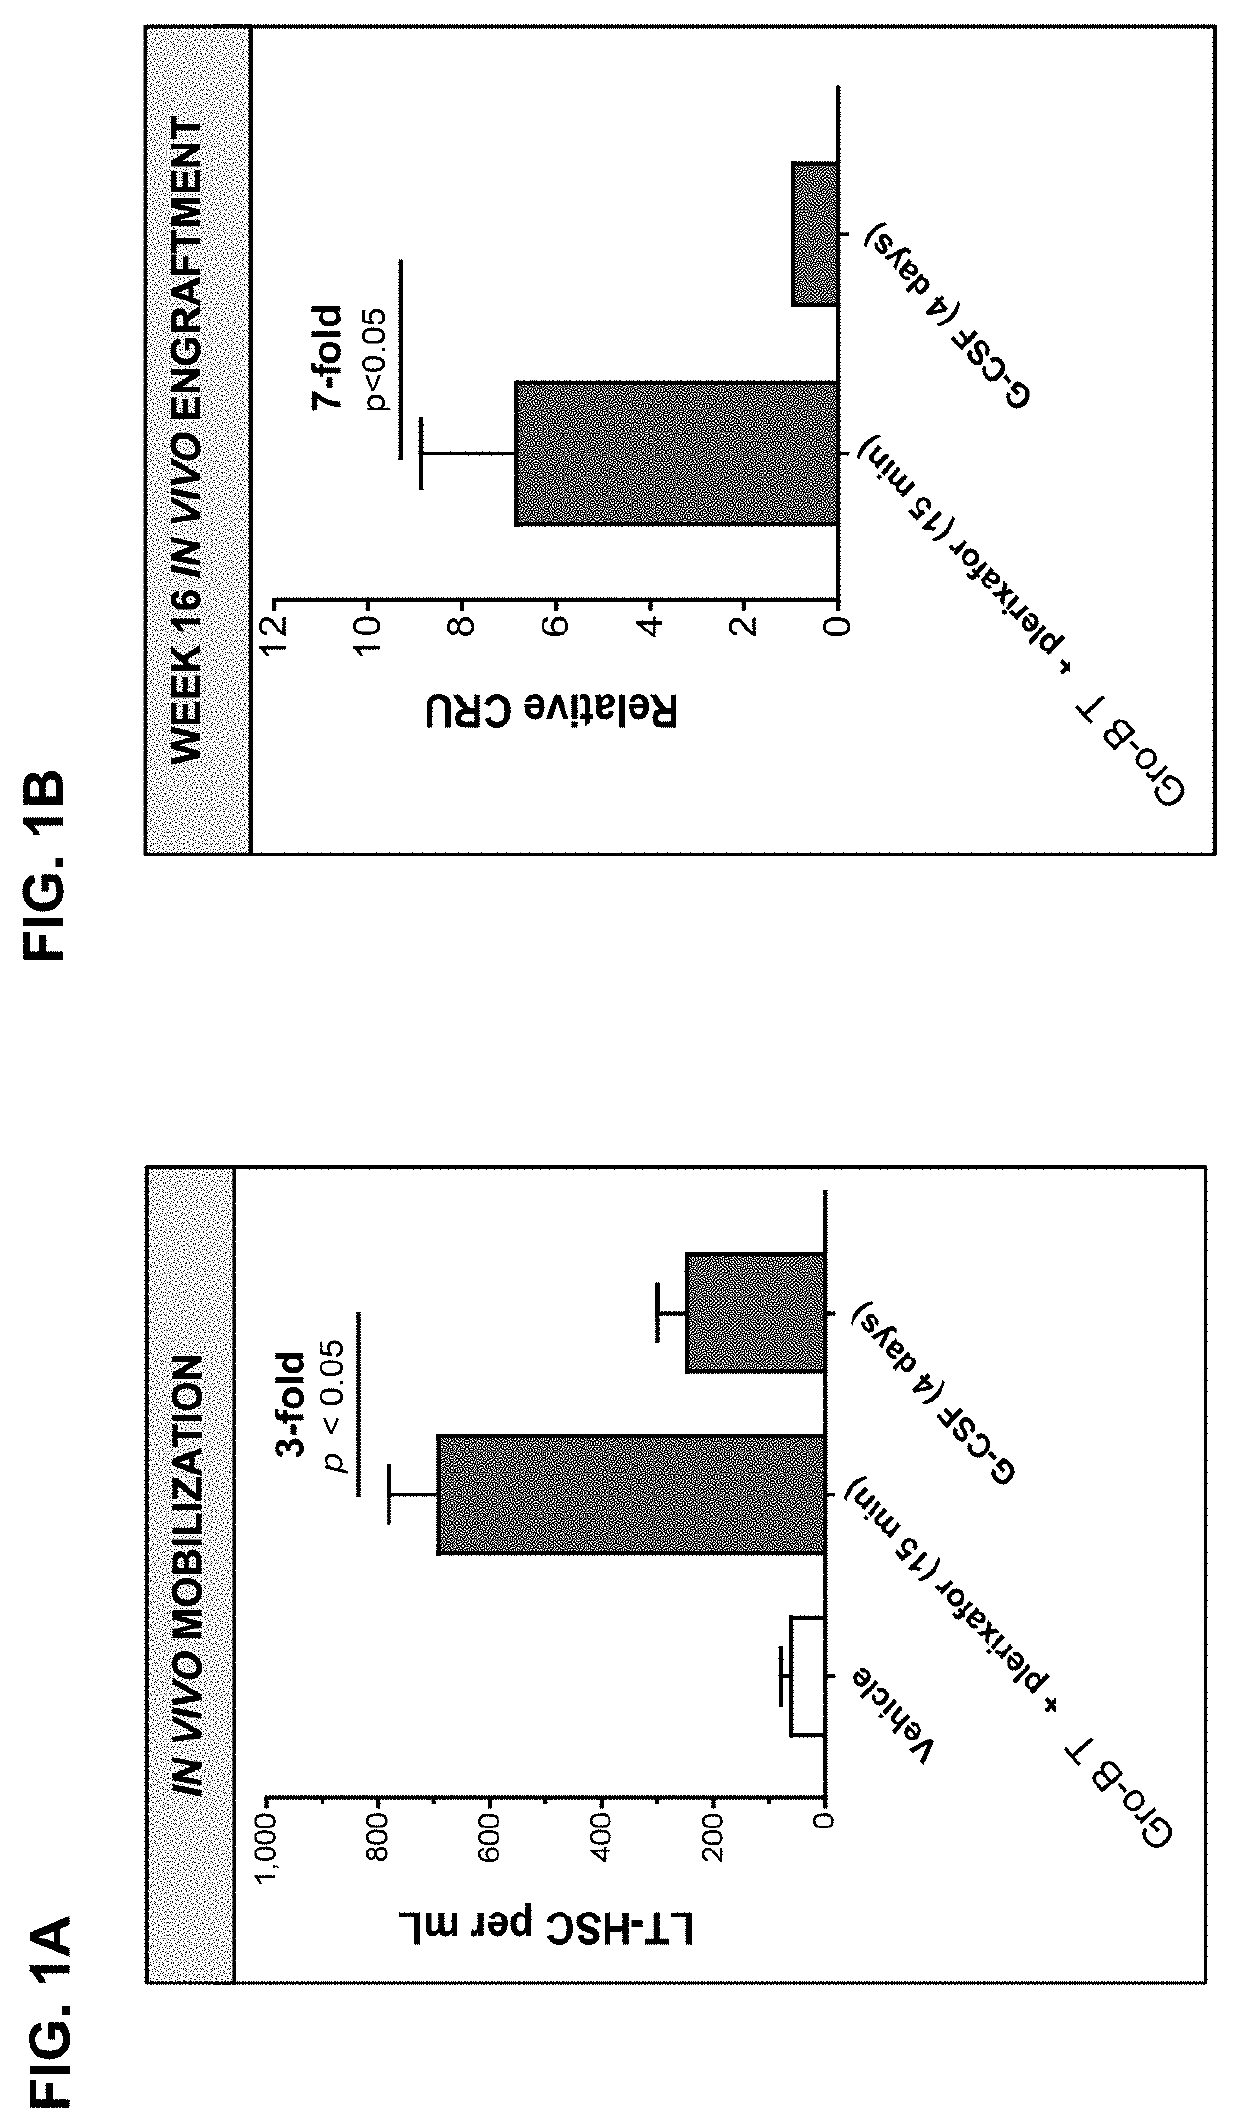 Dosing regimens for the mobilization of hematopoietic stem and progenitor cells